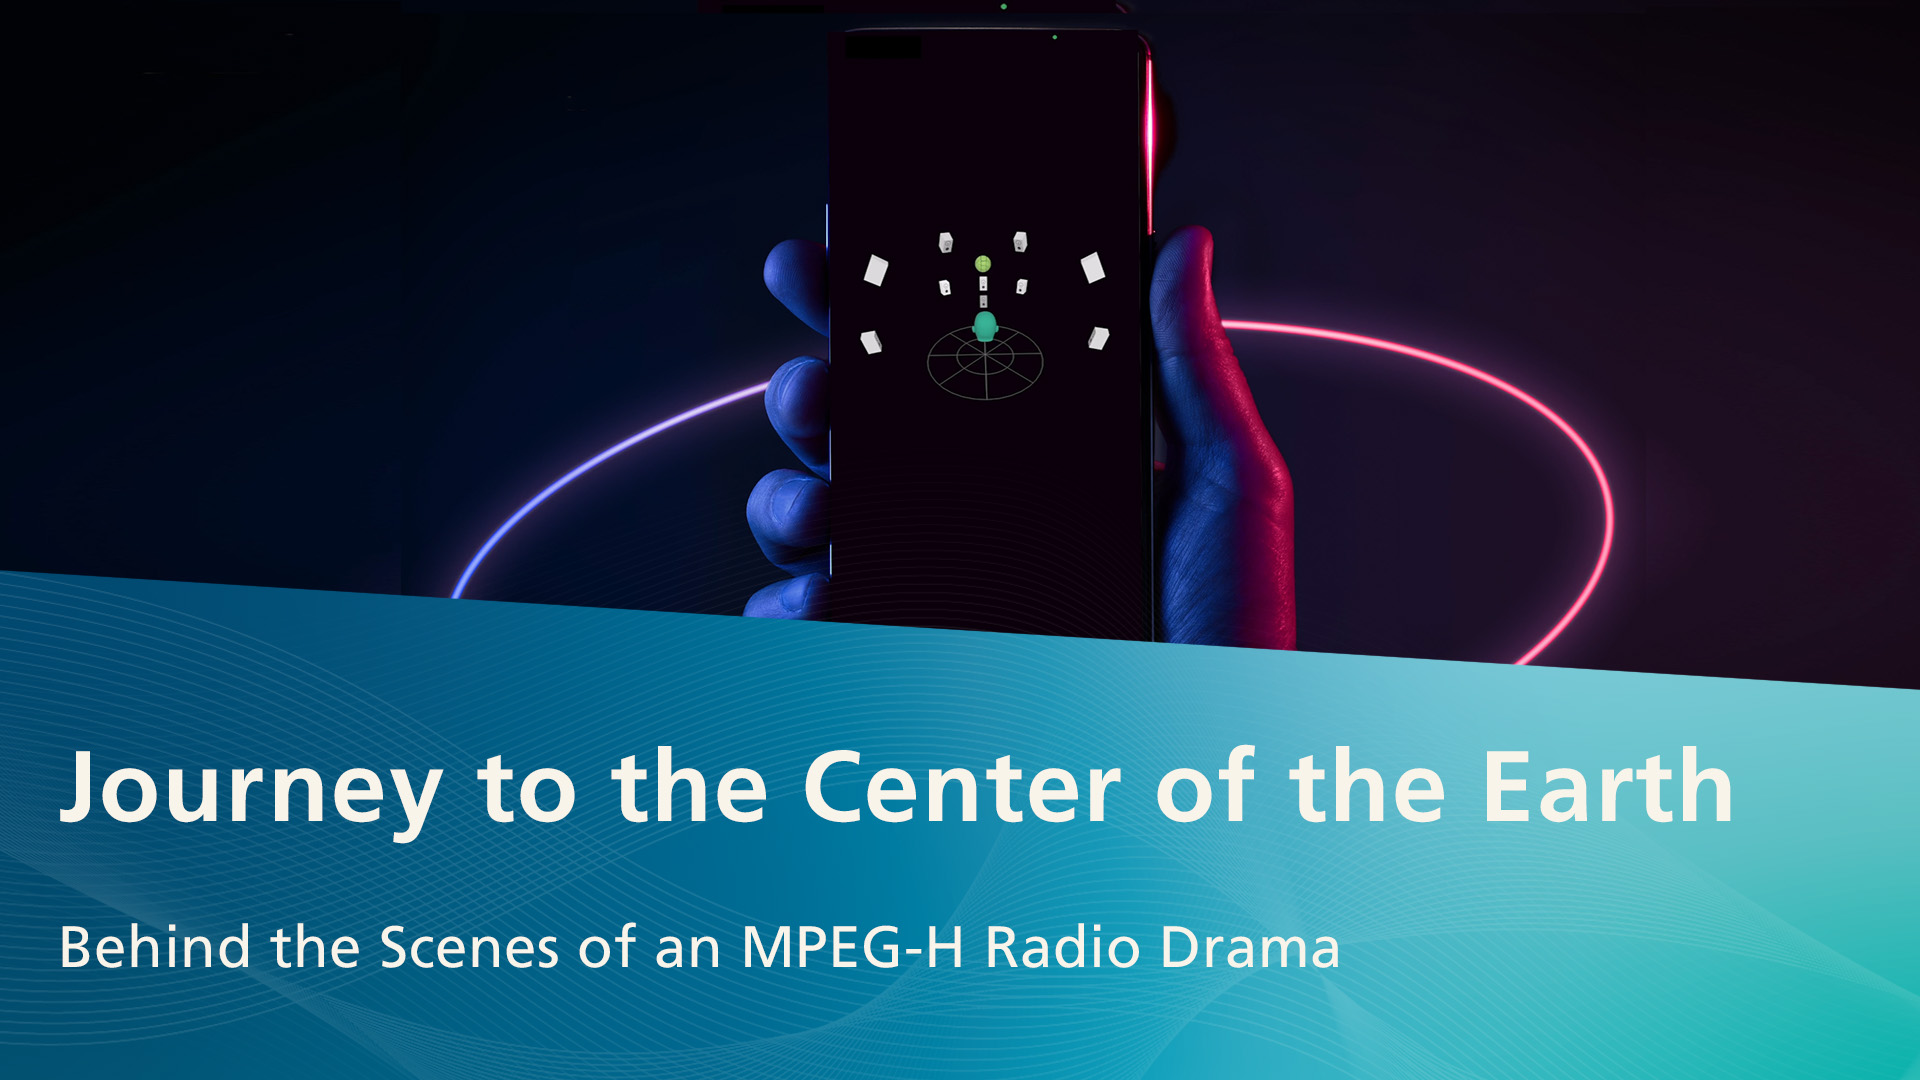 Video MPEG-H Audio Journey to the Center of the Earth